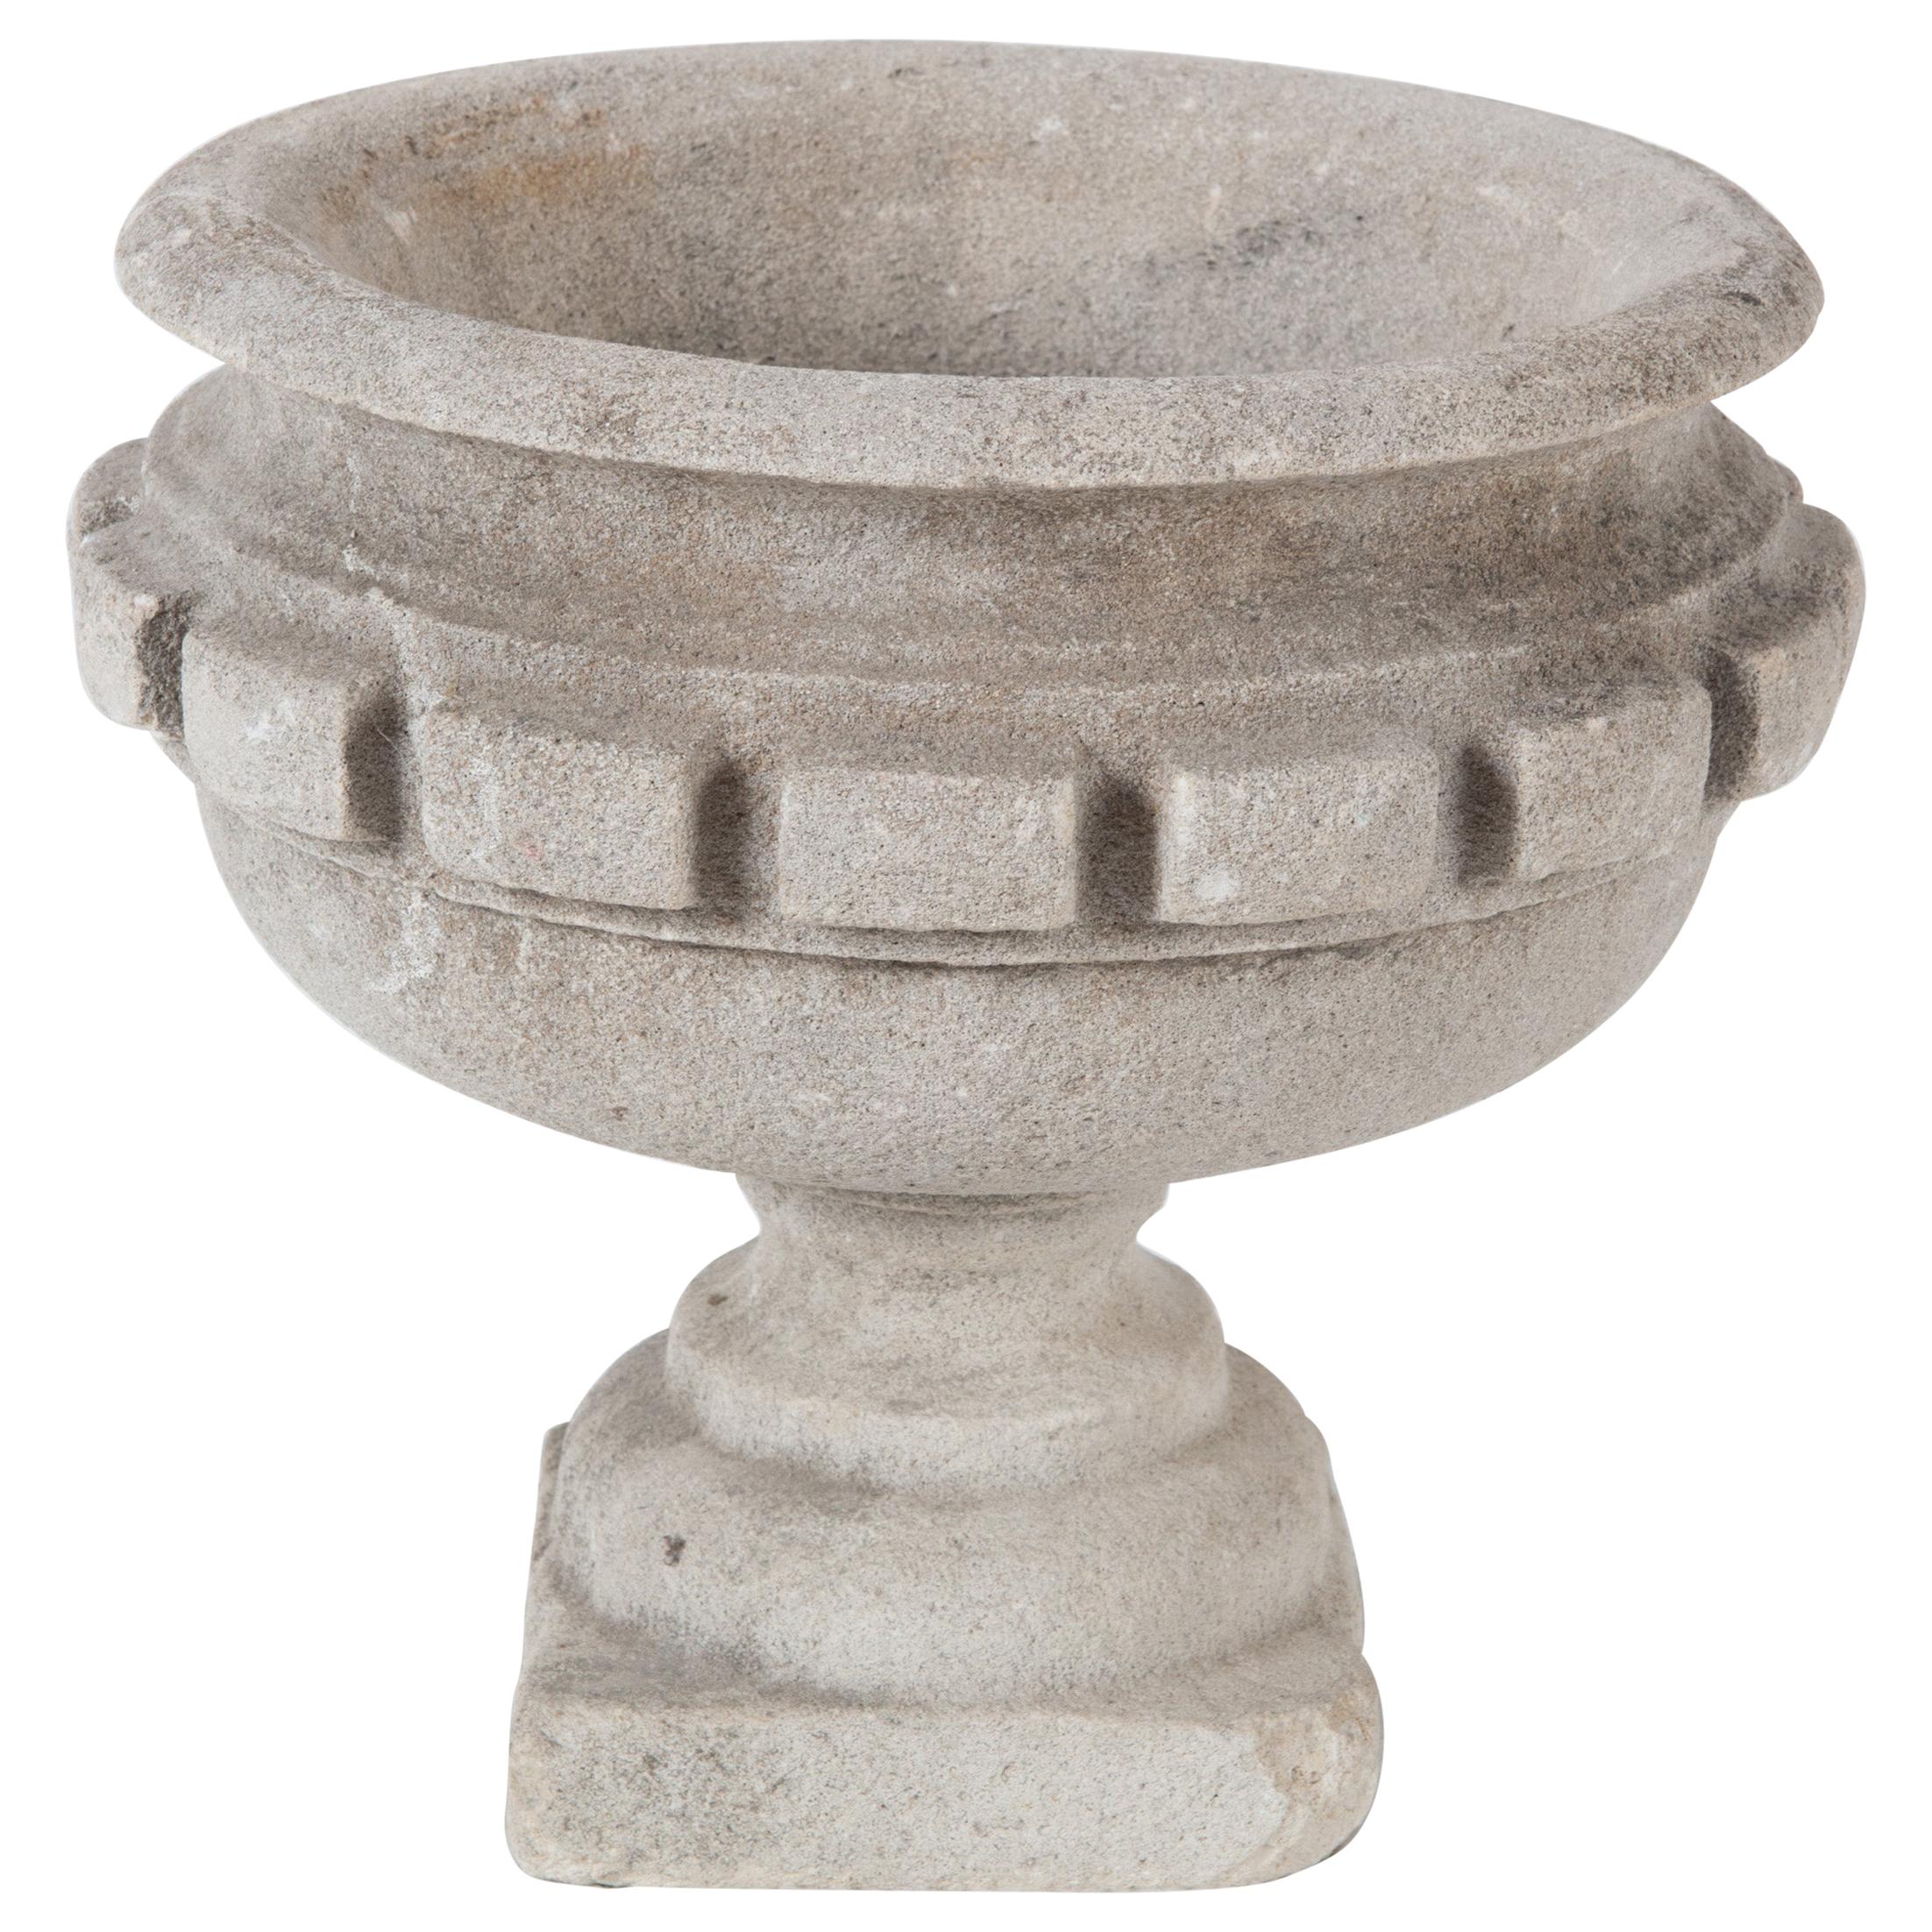 19th Century French Carved Stone Planter / Urn with Dental Trim For Sale